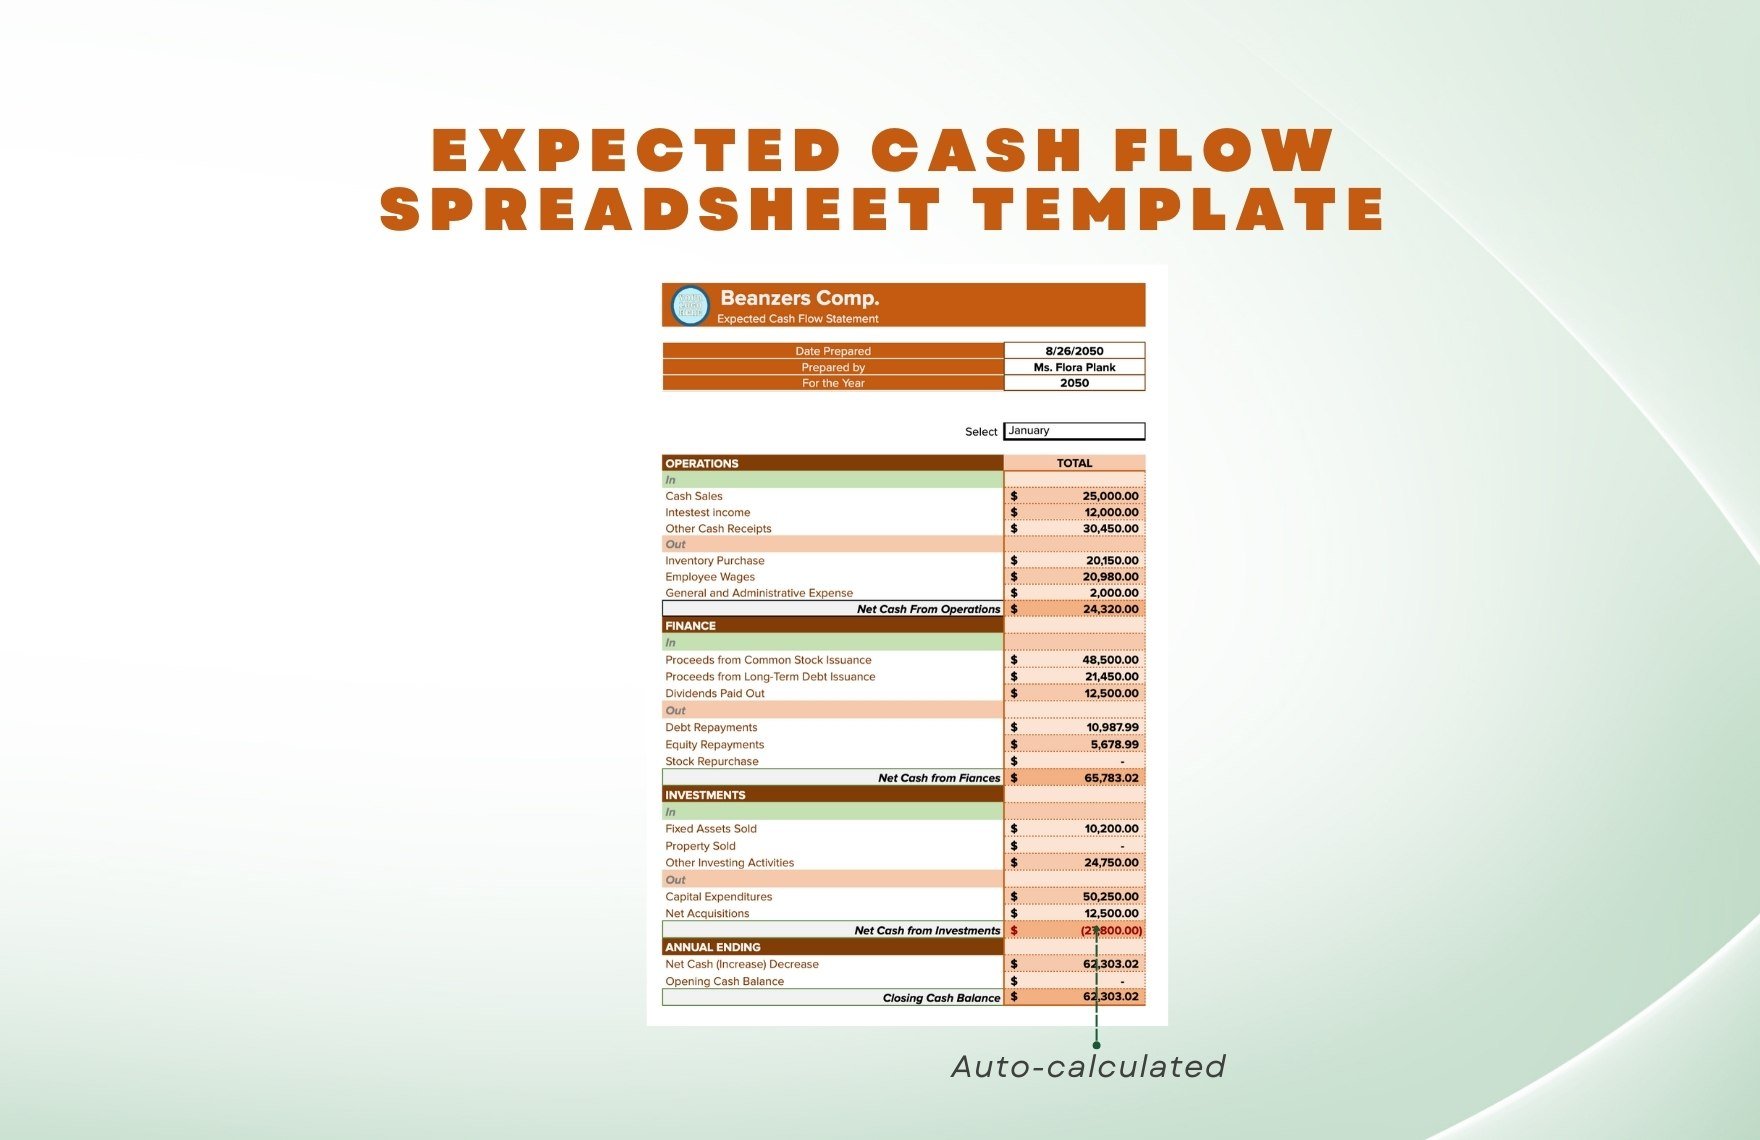 Expected Cash Flows Spreadsheet